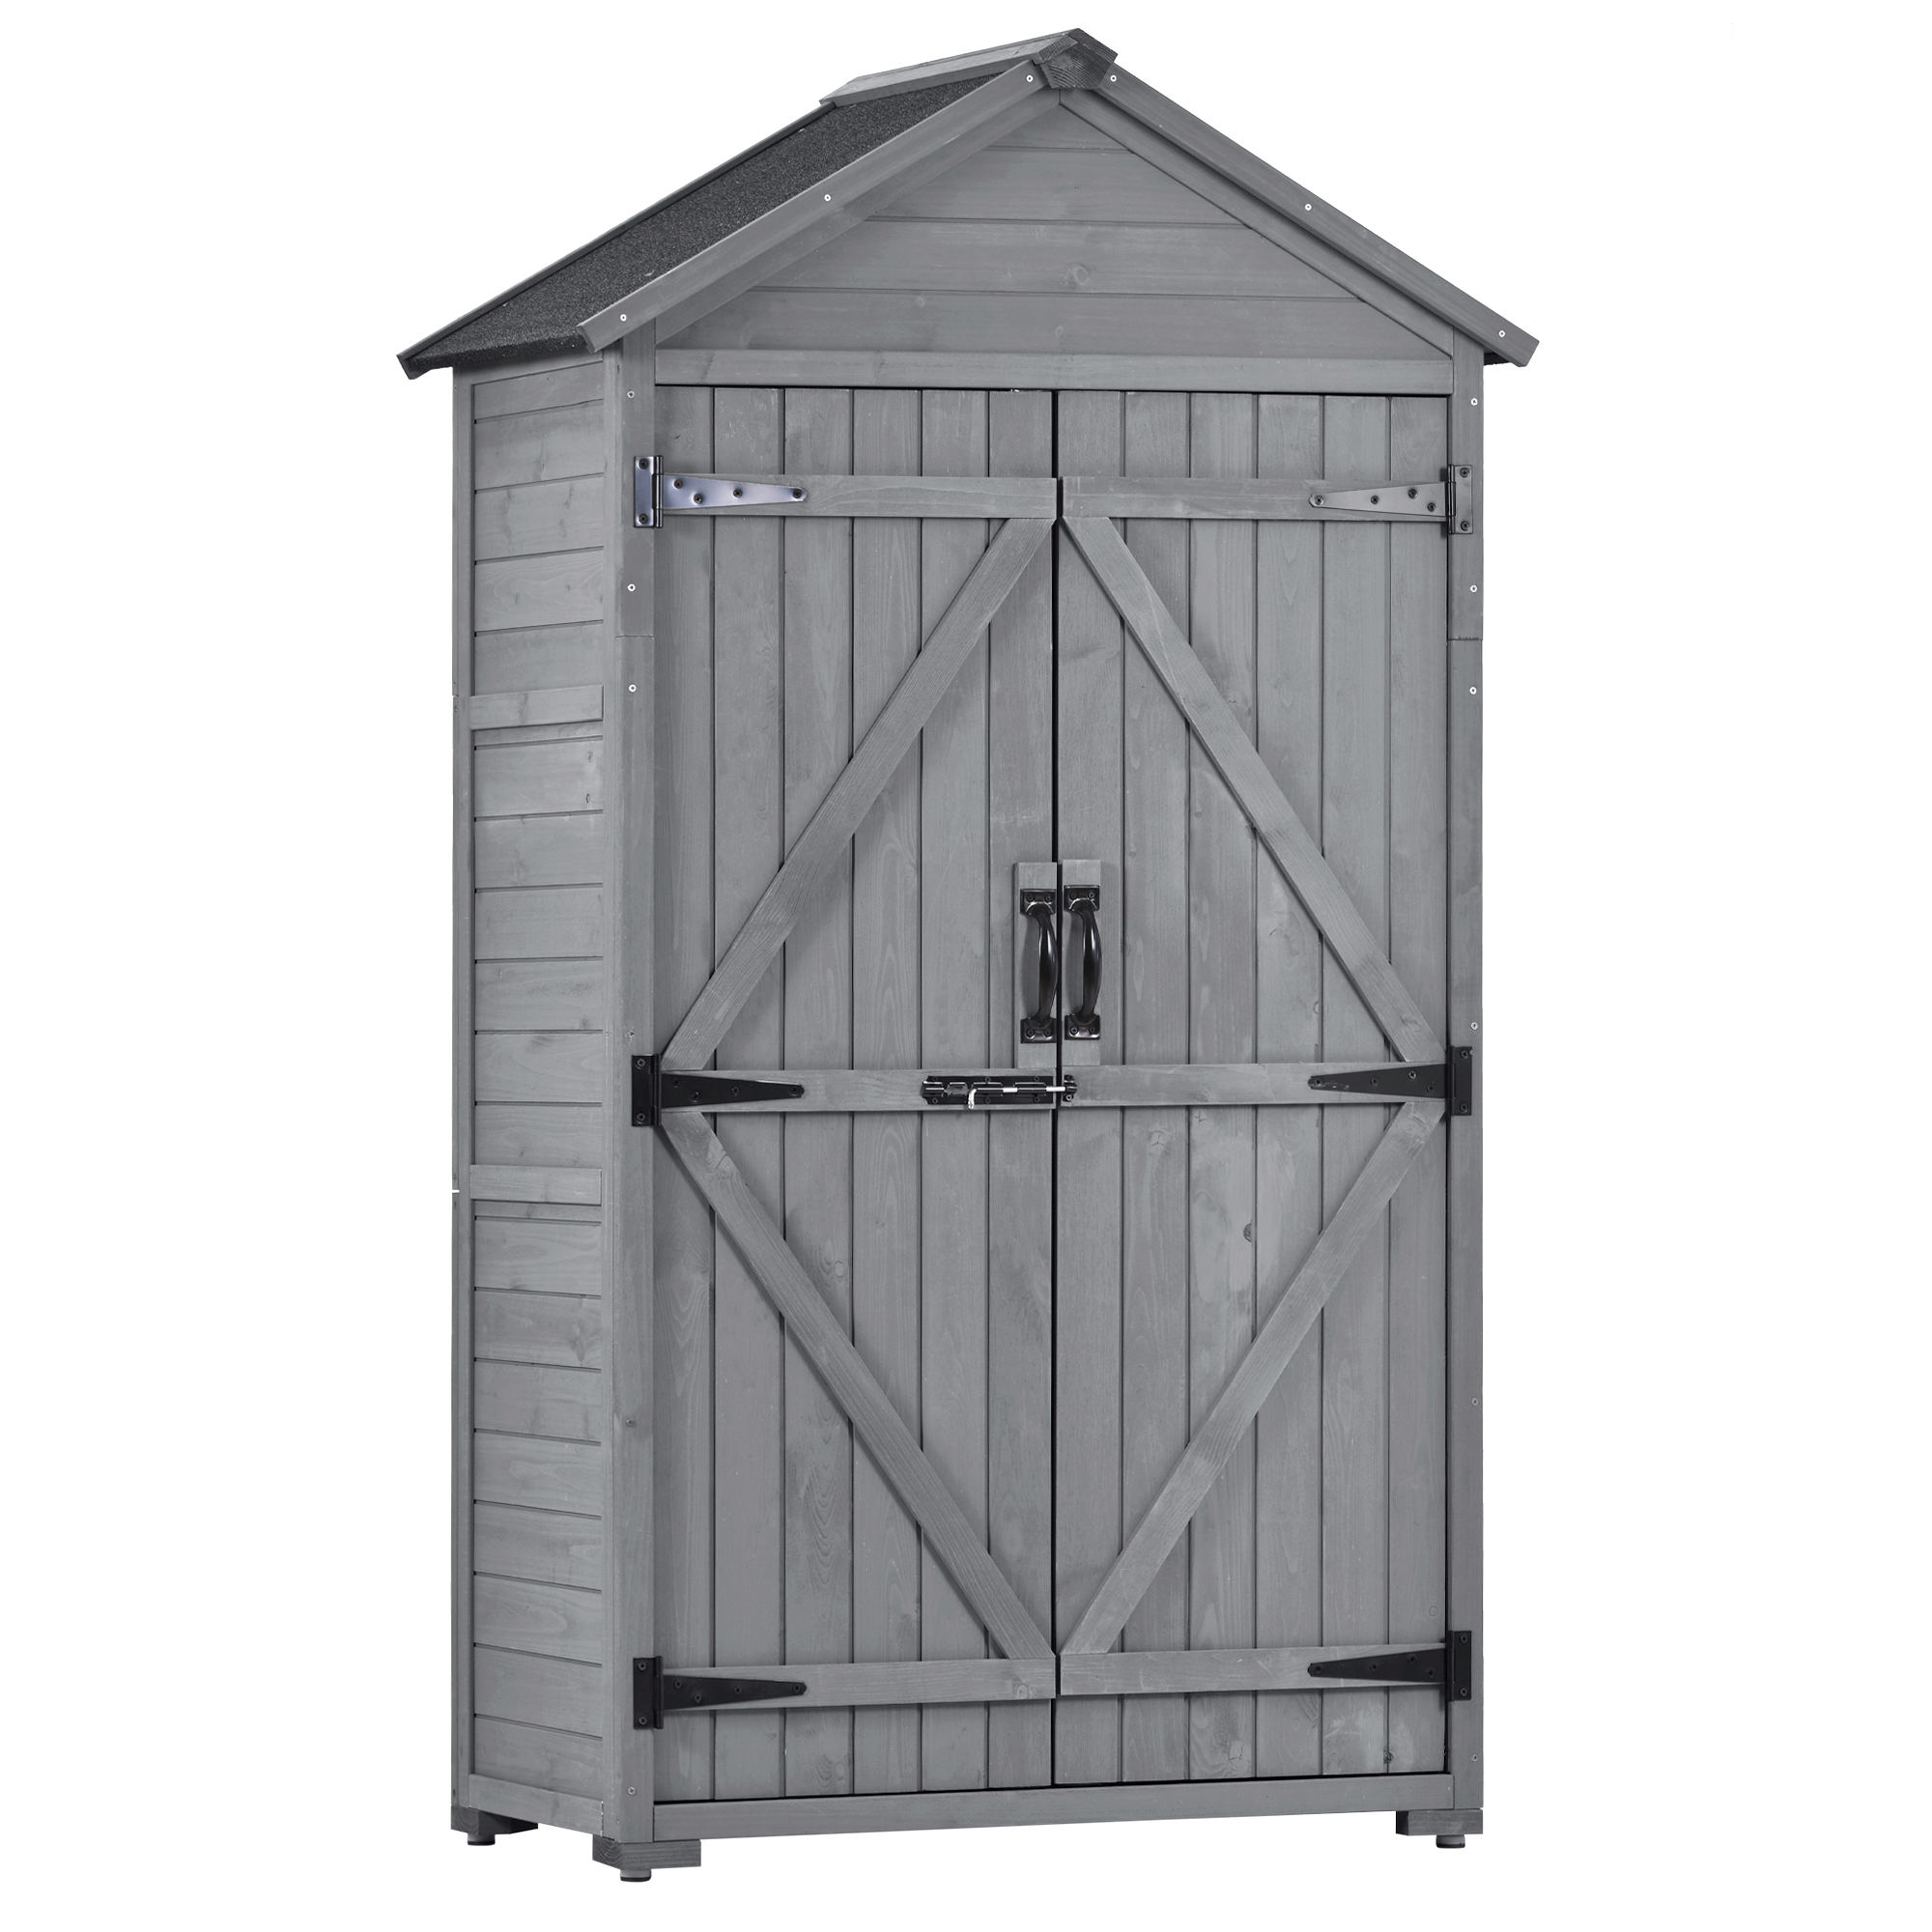 5.8ft * 3ft Outdoor Wood Lean-to Storage Shed - SH000167AAE